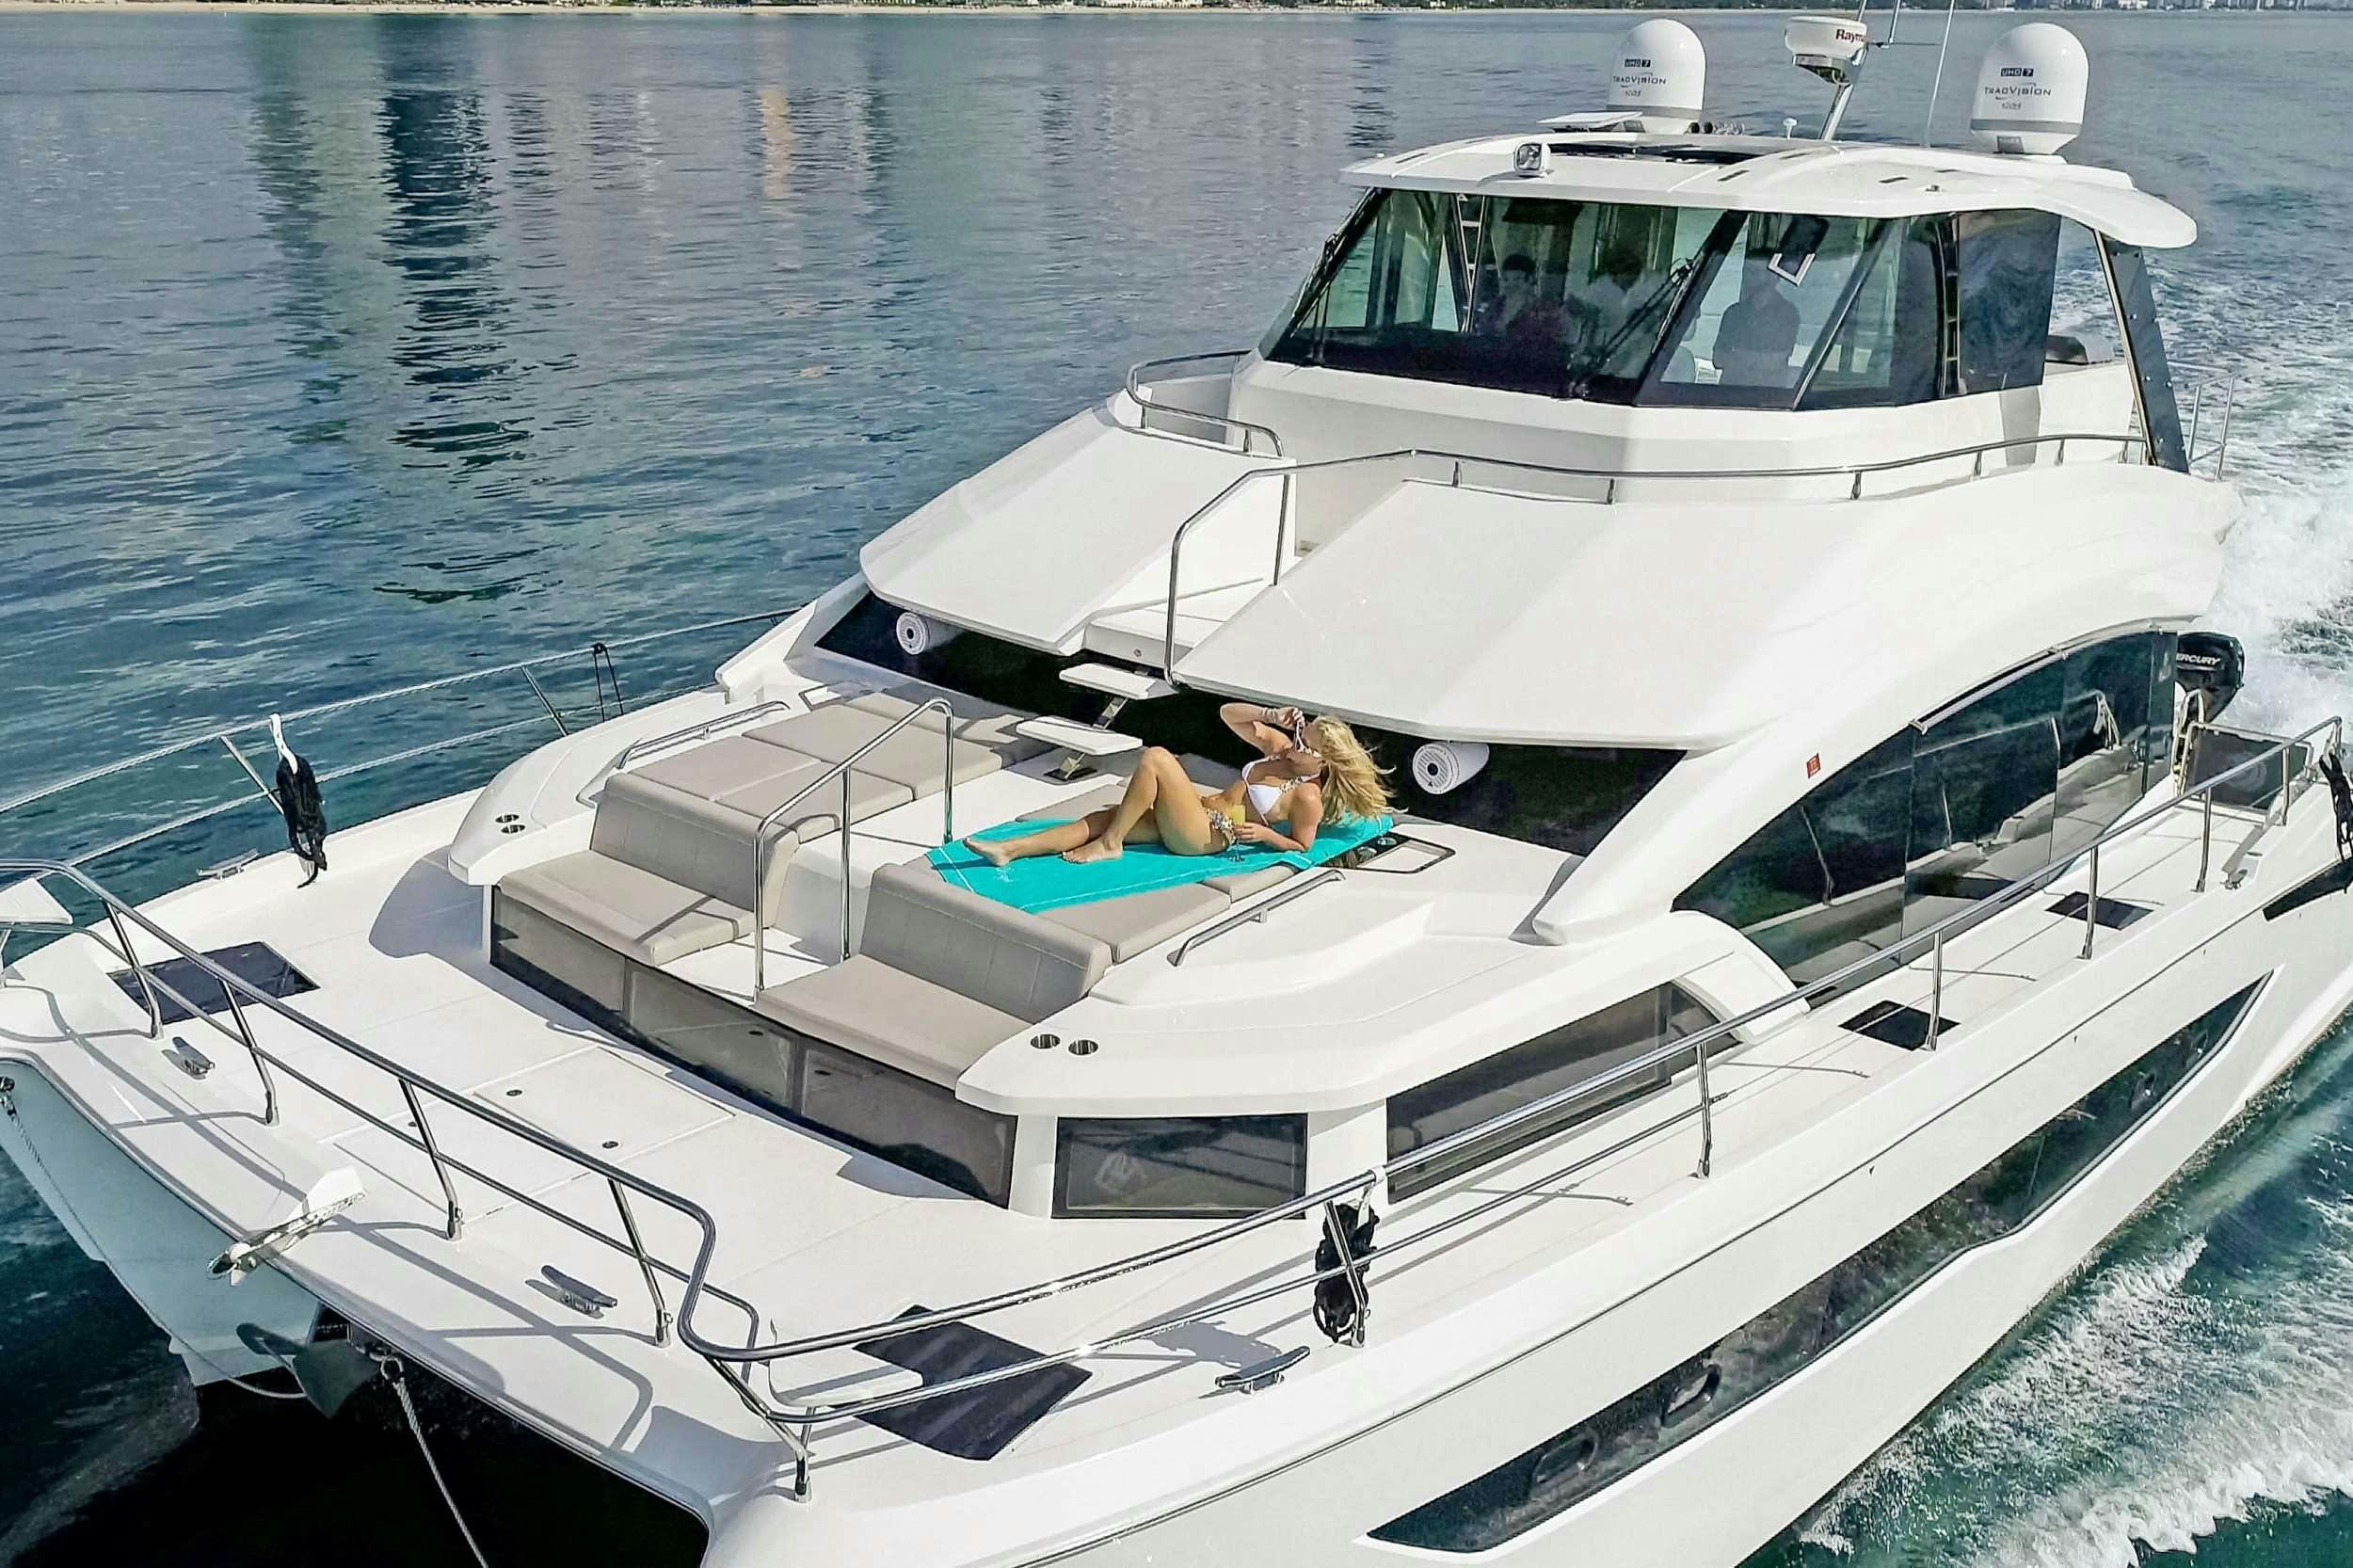 Sea Angel - Yacht Charter USA & Boat hire in Florida 1